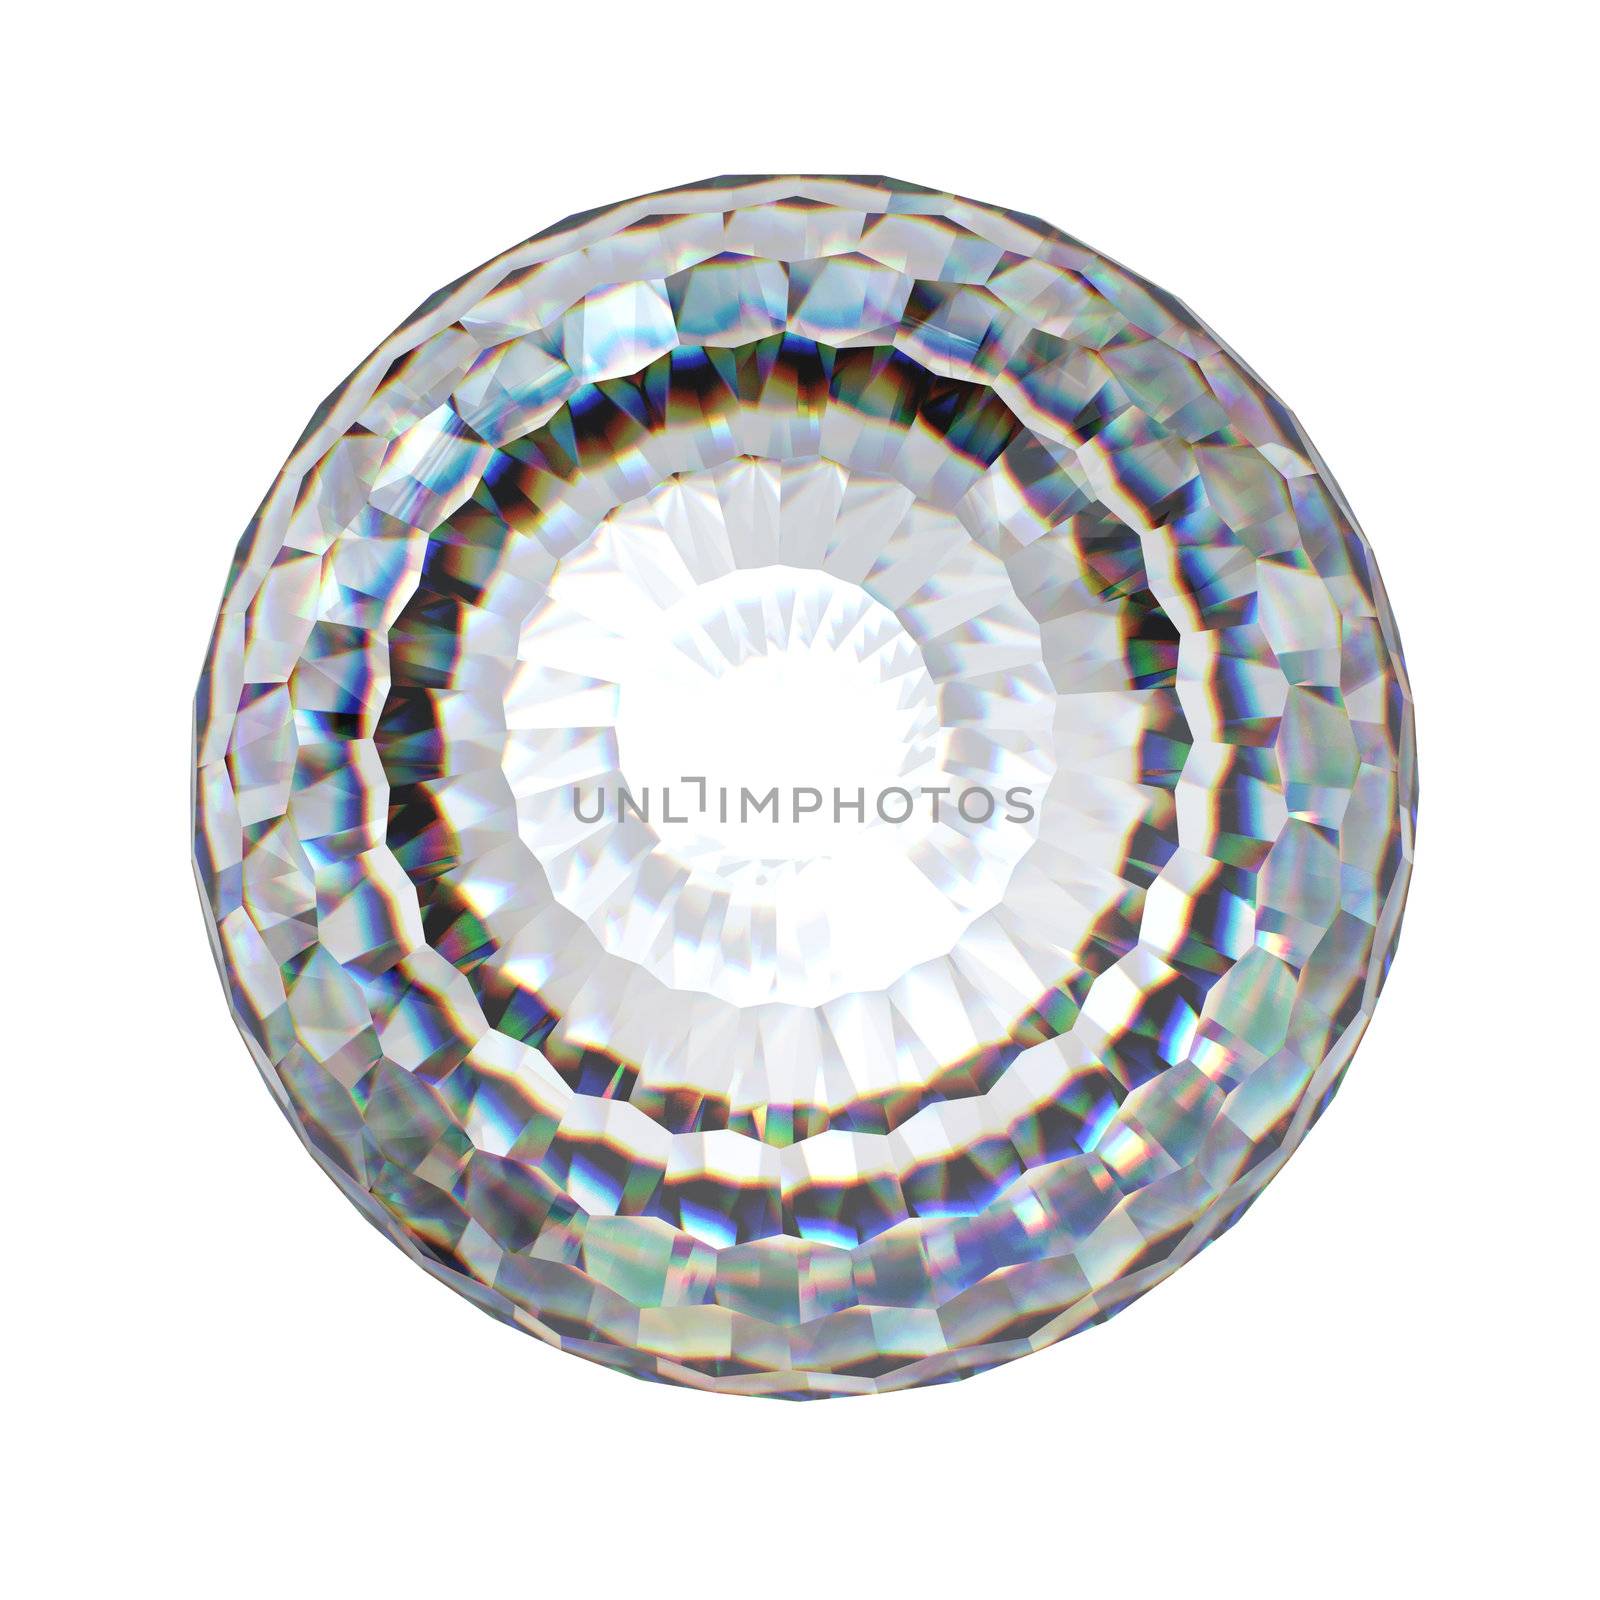 Round brilliant cut diamond perspective isolated on white background